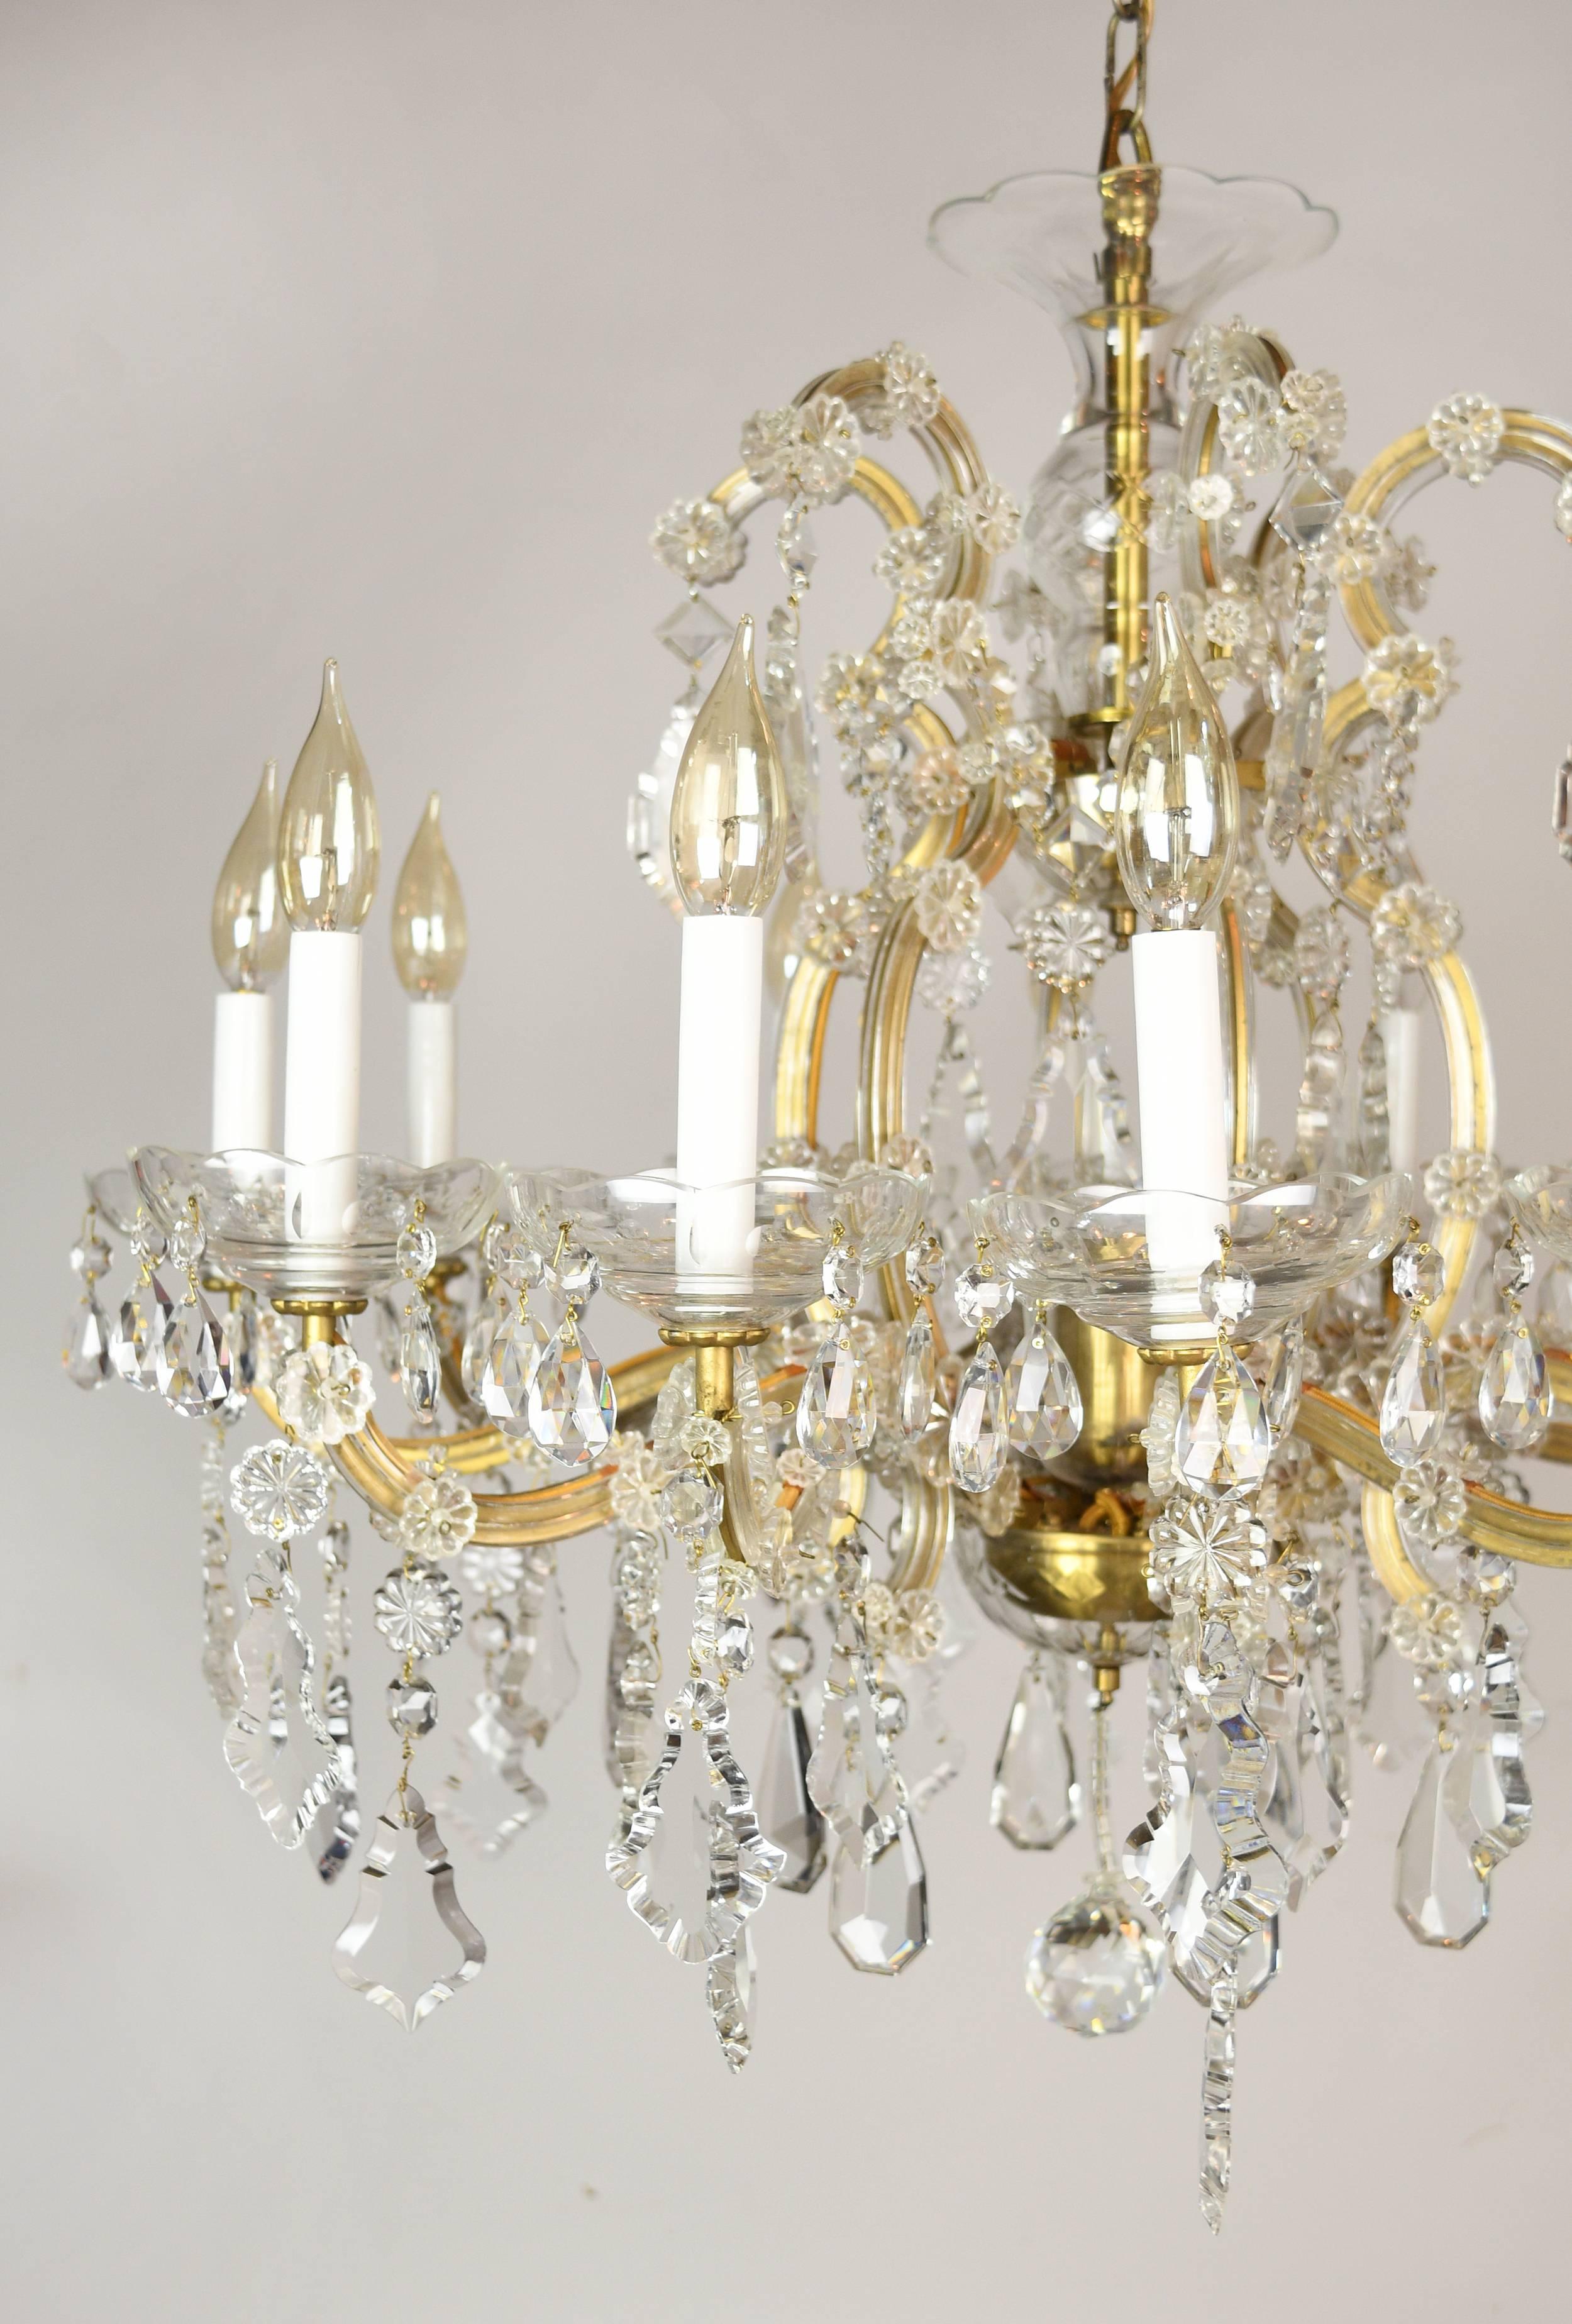 This beautiful 12-arm Maria Theresa crystal chandelier is shiny and heavy, and every arm is draped with numerous glittering crystals of varying shapes and sizes. This fixture would be perfect over a dining room table or in a grand foyer. It’s got